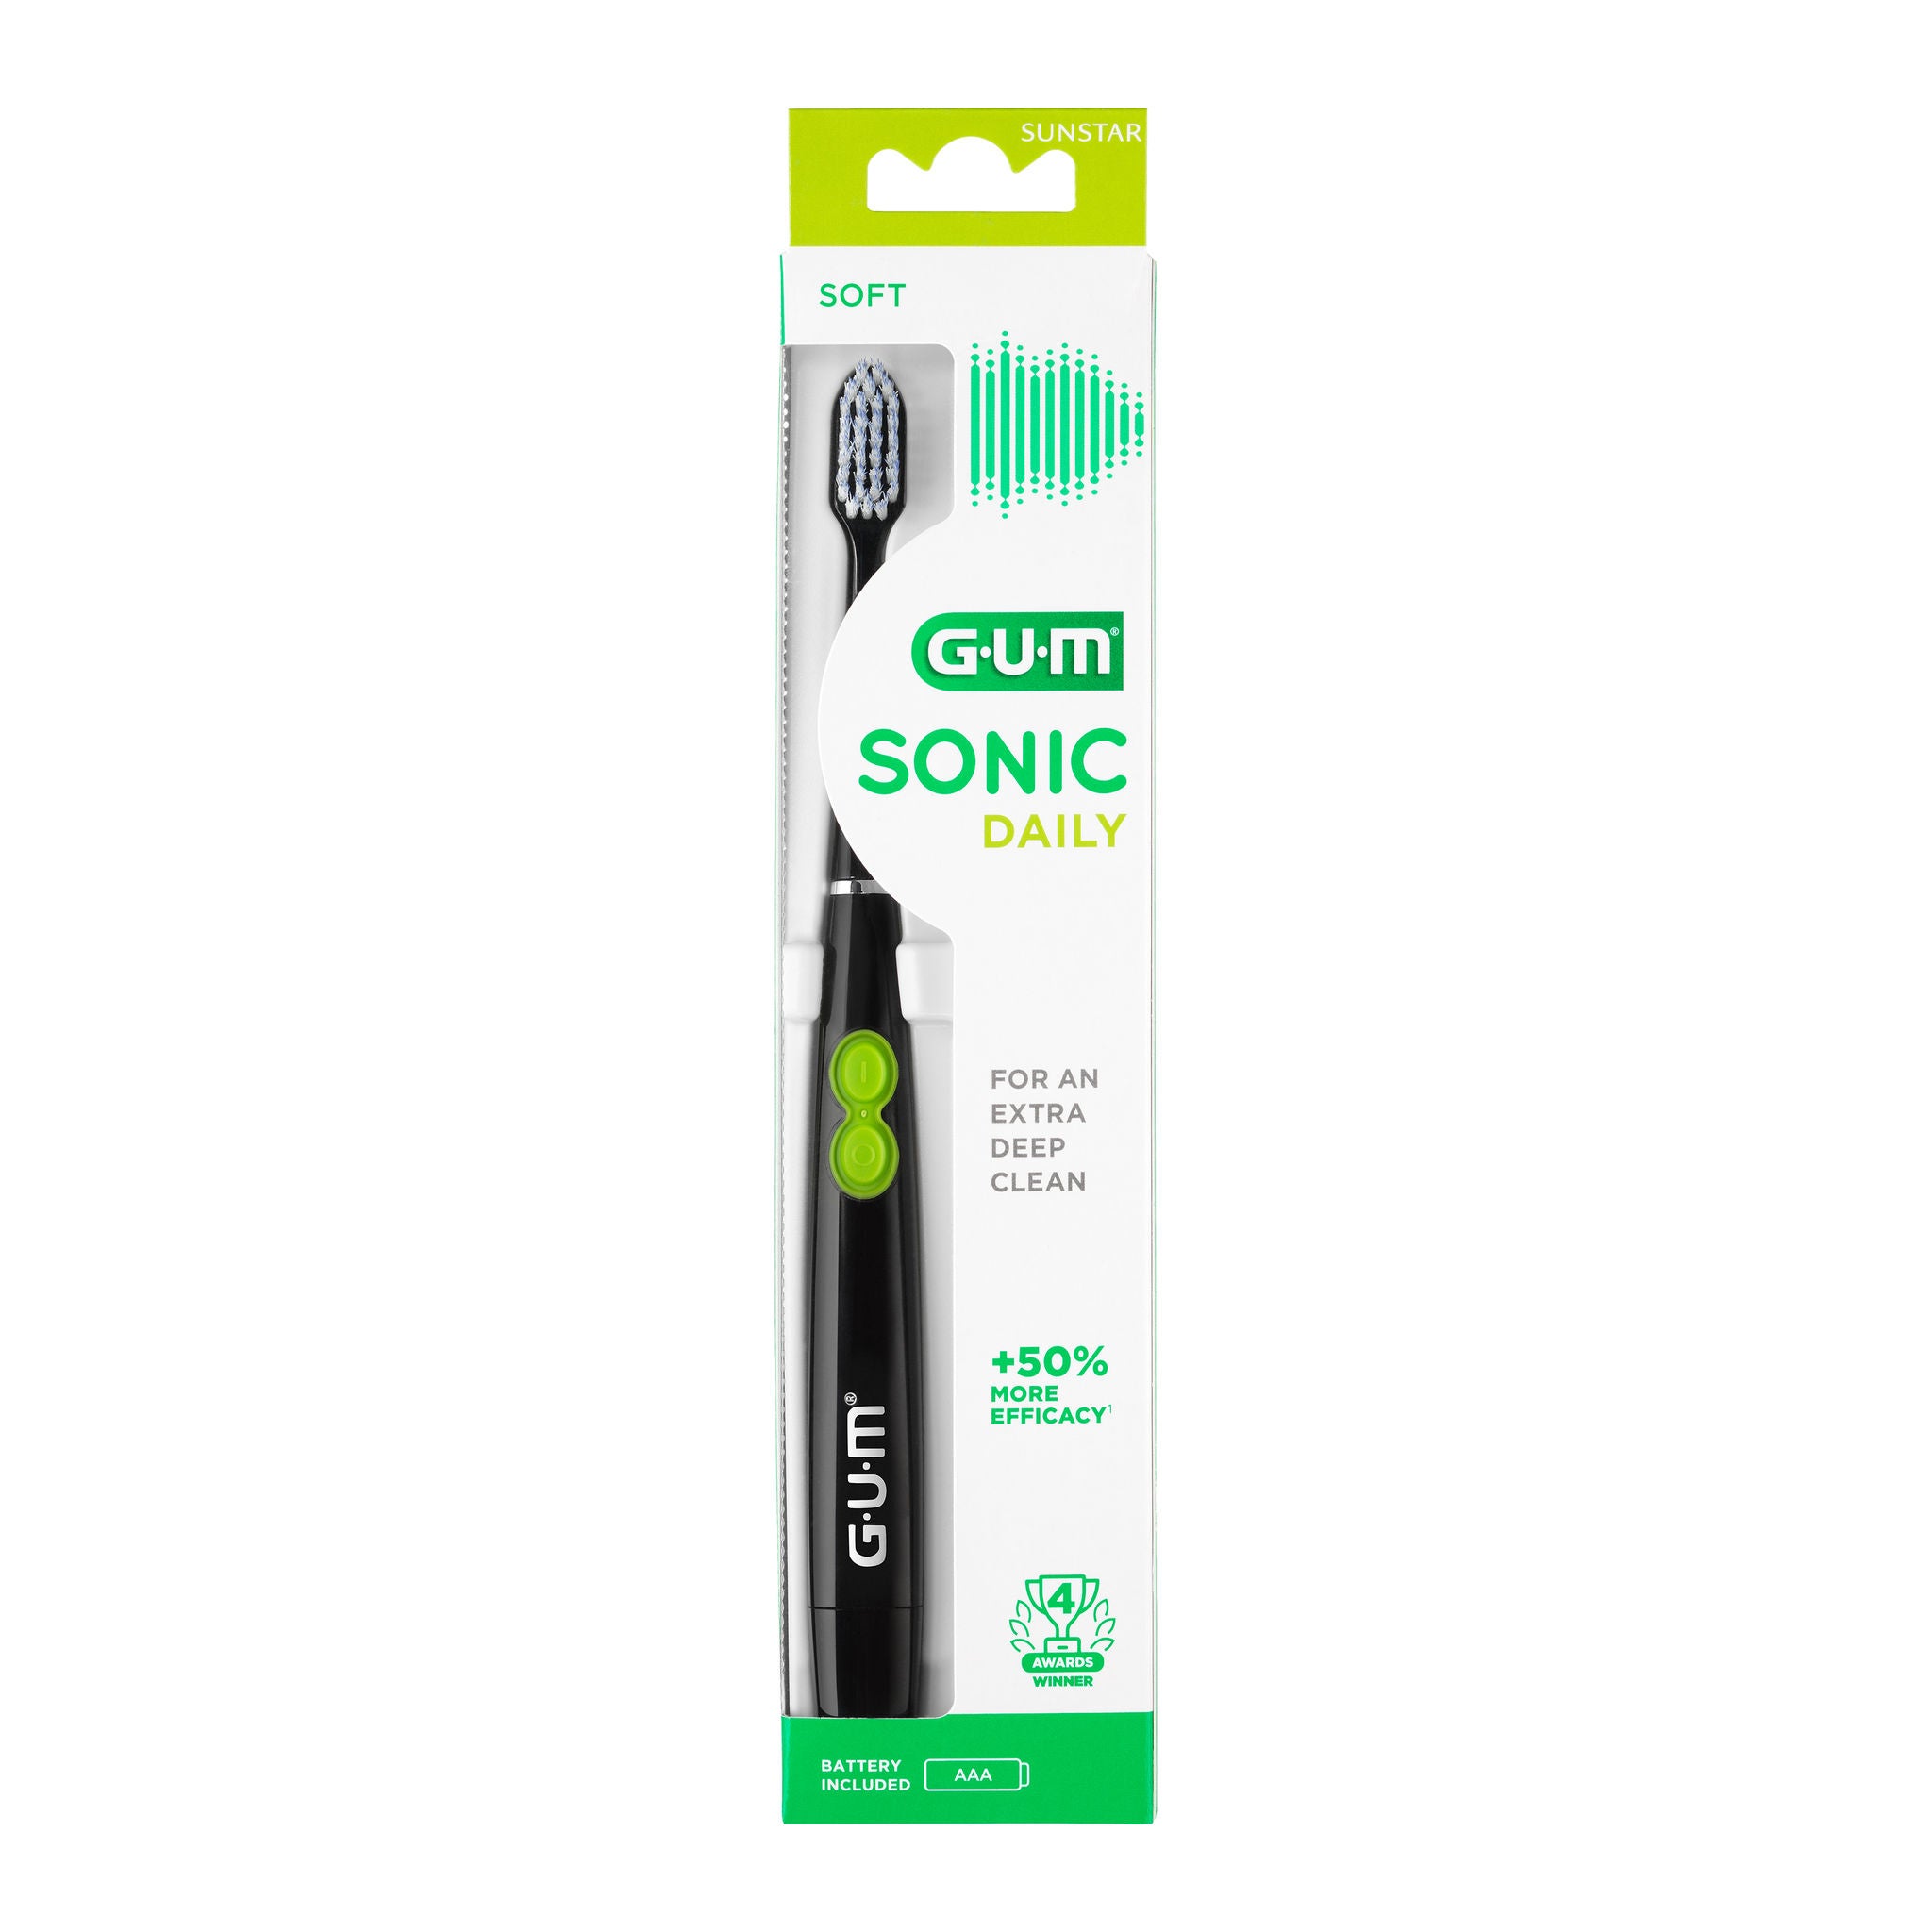 4100MBK2-GUM-SONICDAILY-TOOTHBRUSHES-BLACK-COMPACT-SOFT-1ct-BOX-P1.jpg